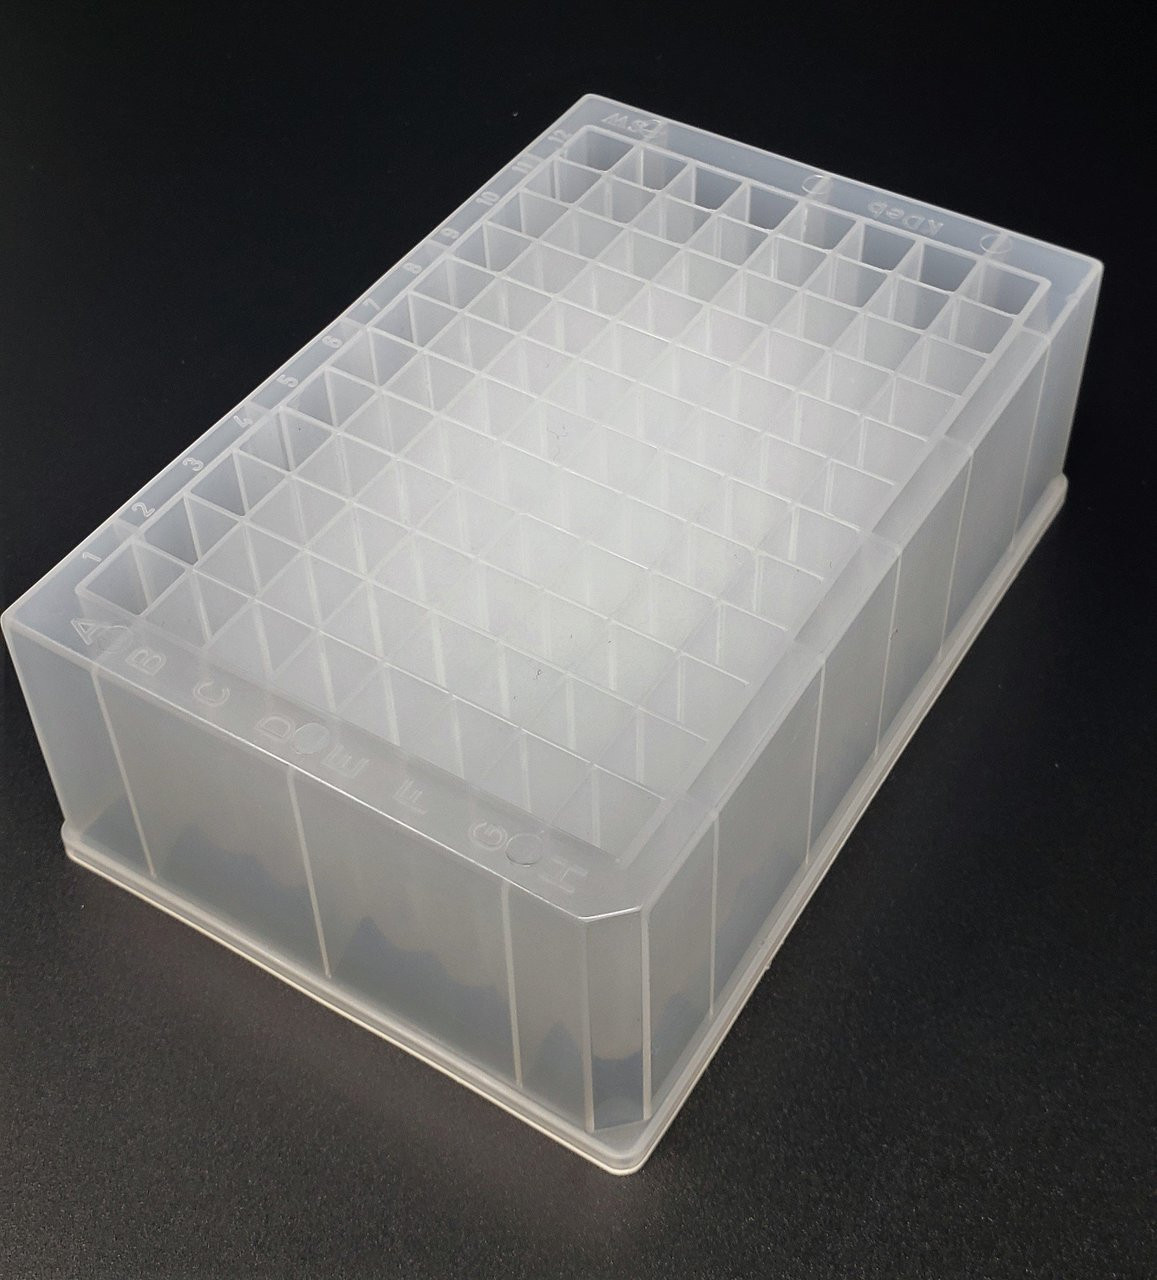 KDeb 2 ml 96 Deep Well Microplate (Square) - Pro Lab Supply Corp